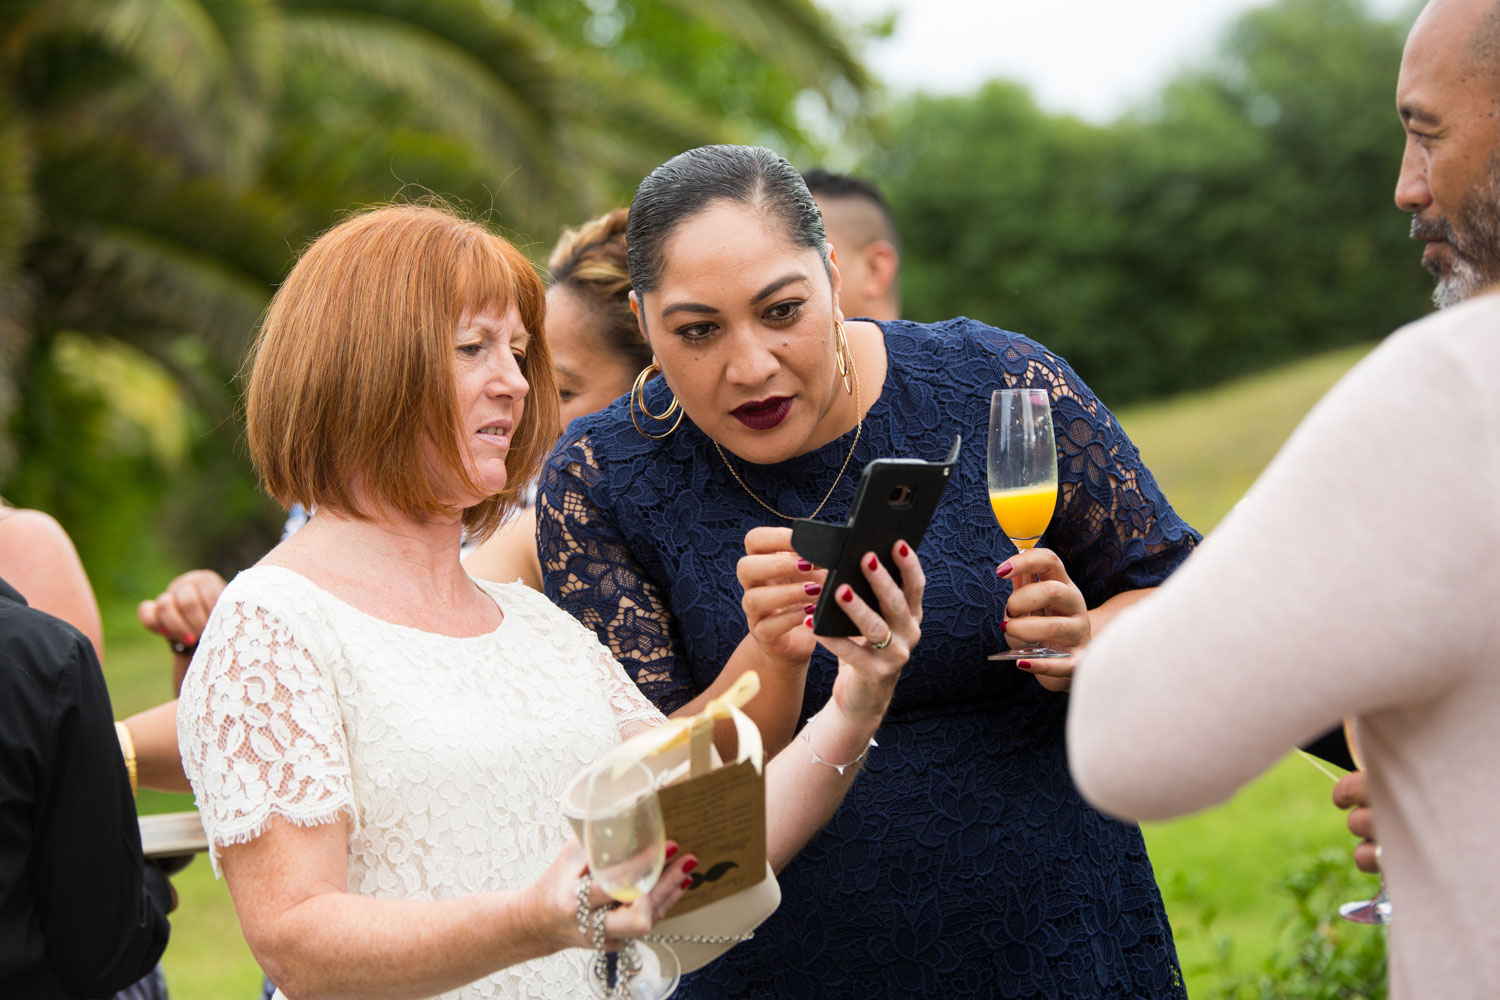 gracehill auckland wedding guests looking at phone